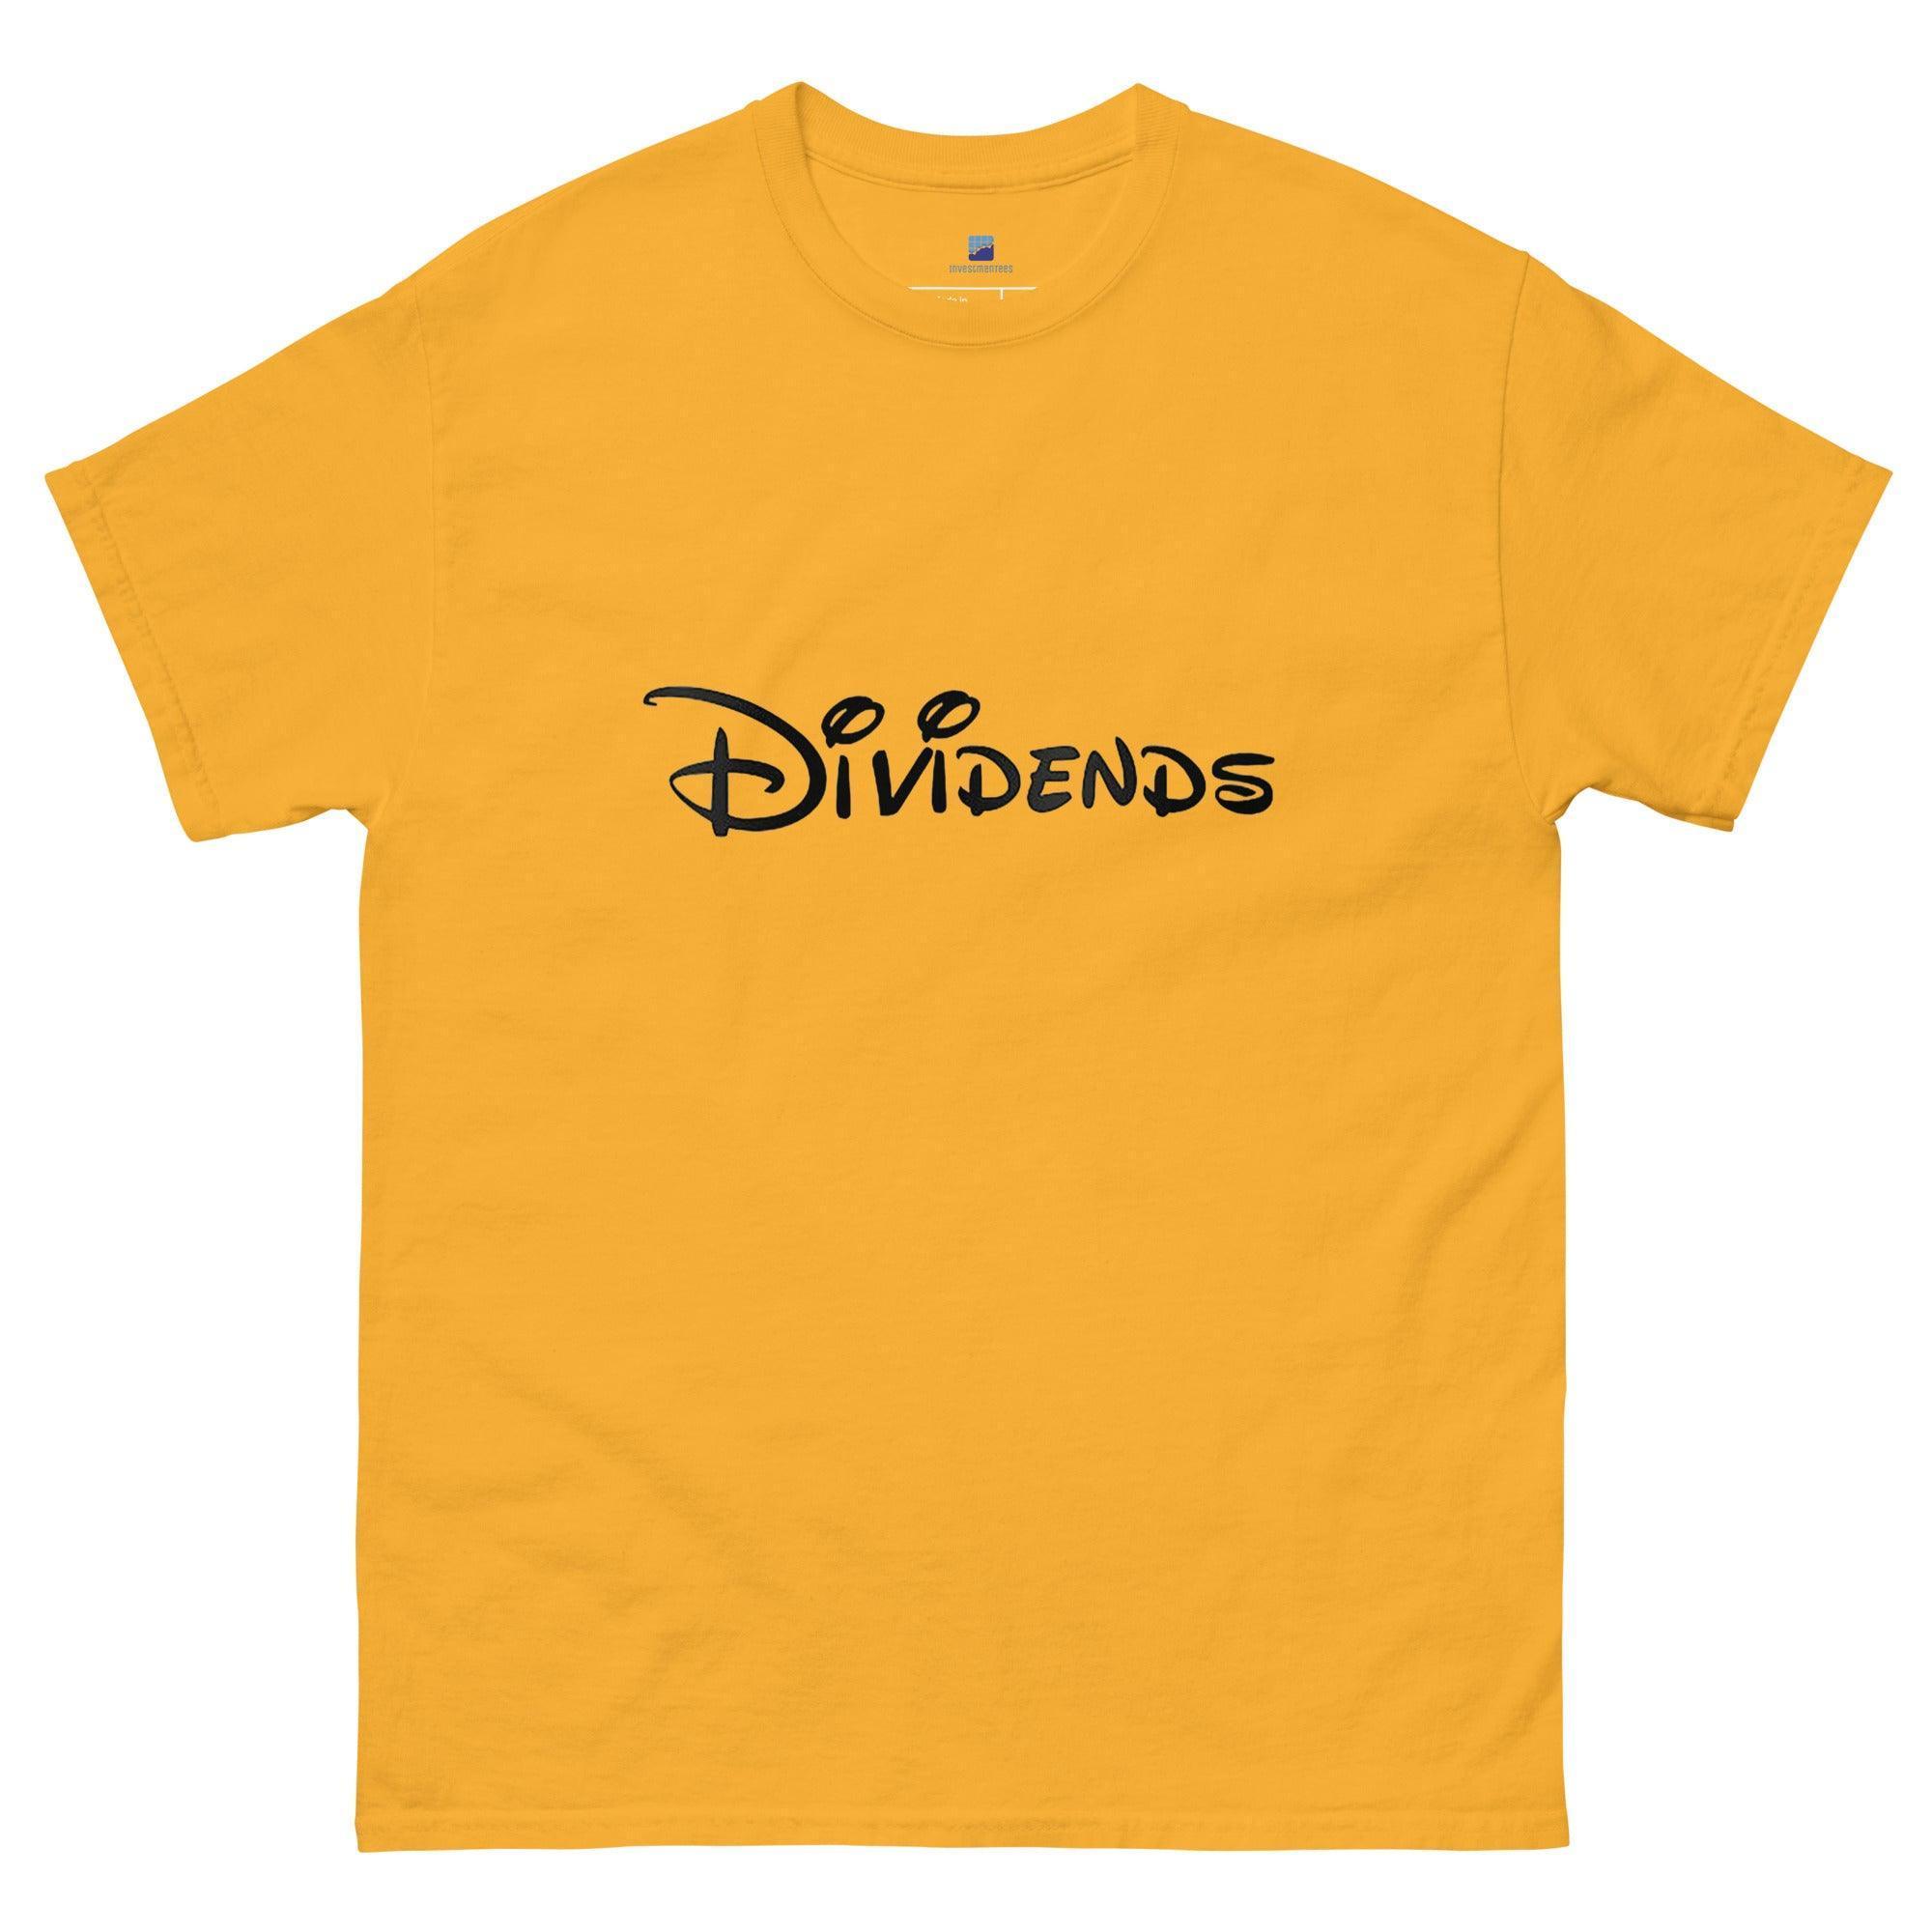 Dividends T-Shirt - InvestmenTees